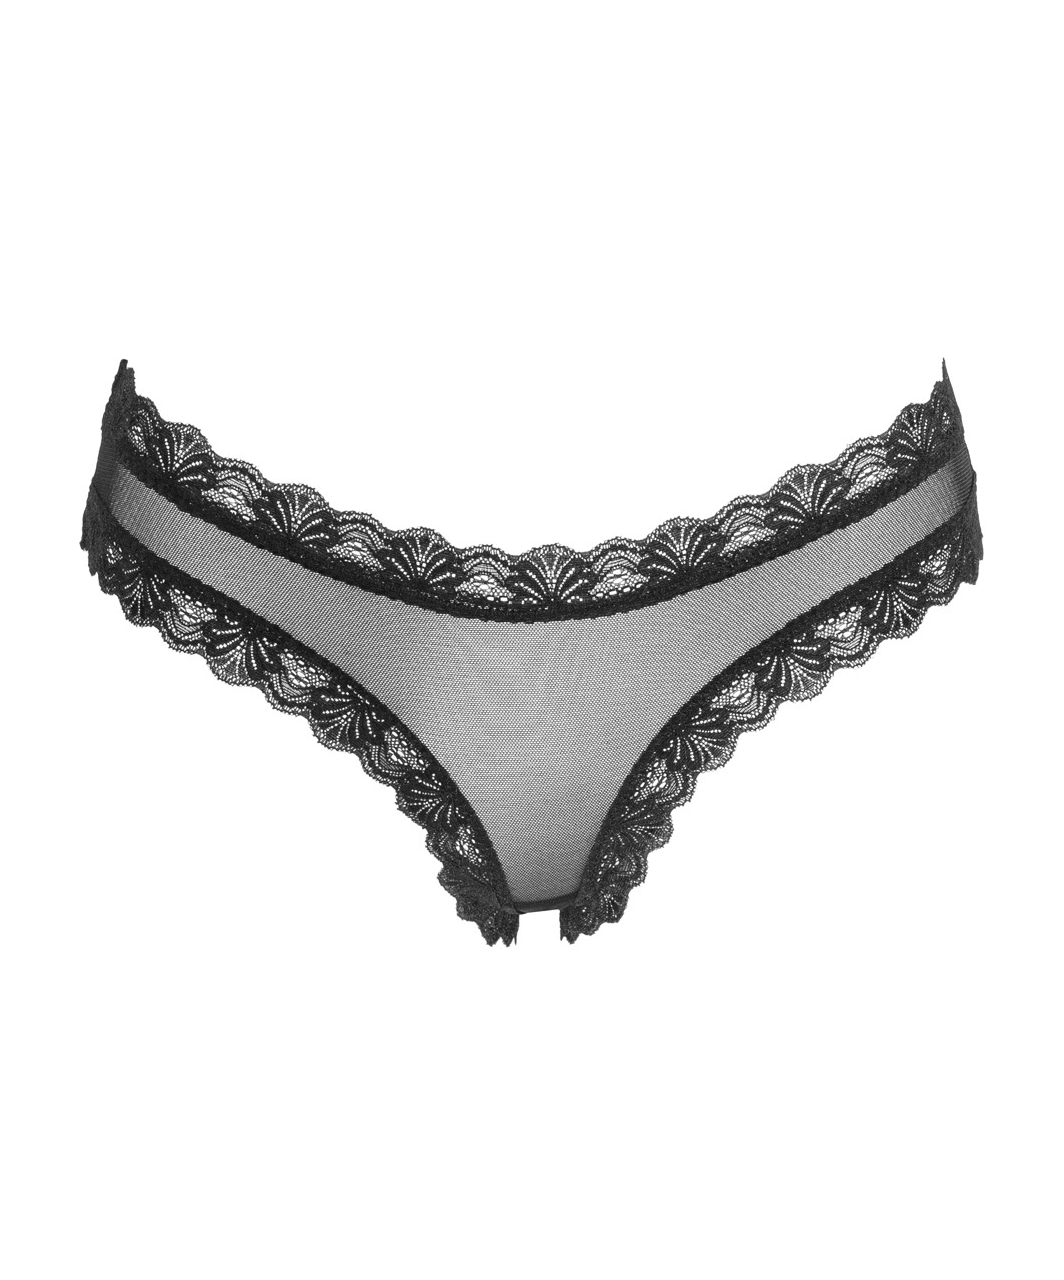 Cottelli Lingerie Black Sheer Mesh Panties With Lacing Sexystyle Eu